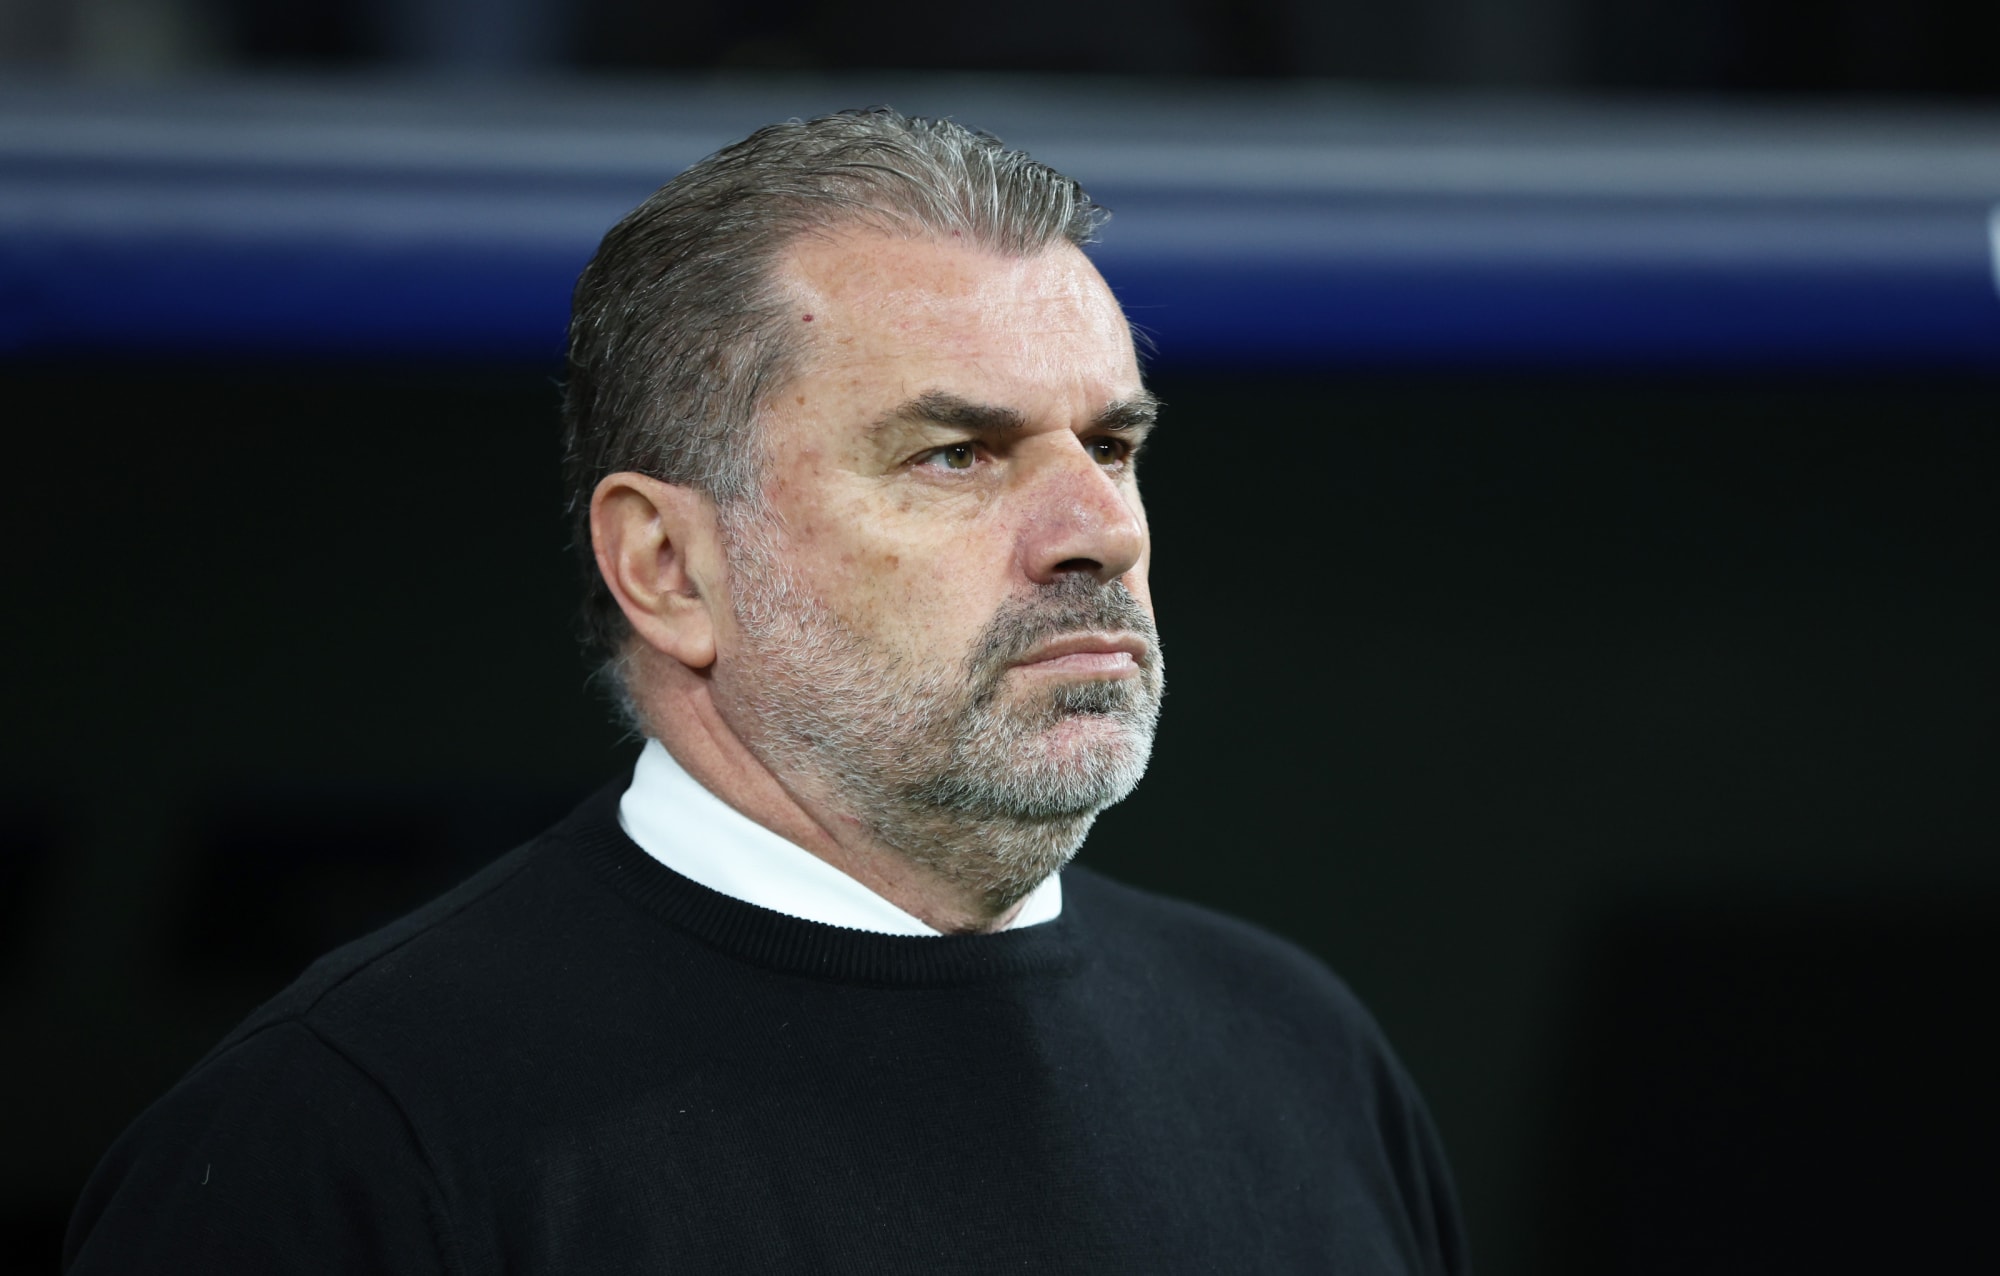 Ange Postecoglou believes he disappointed some Celtic fans